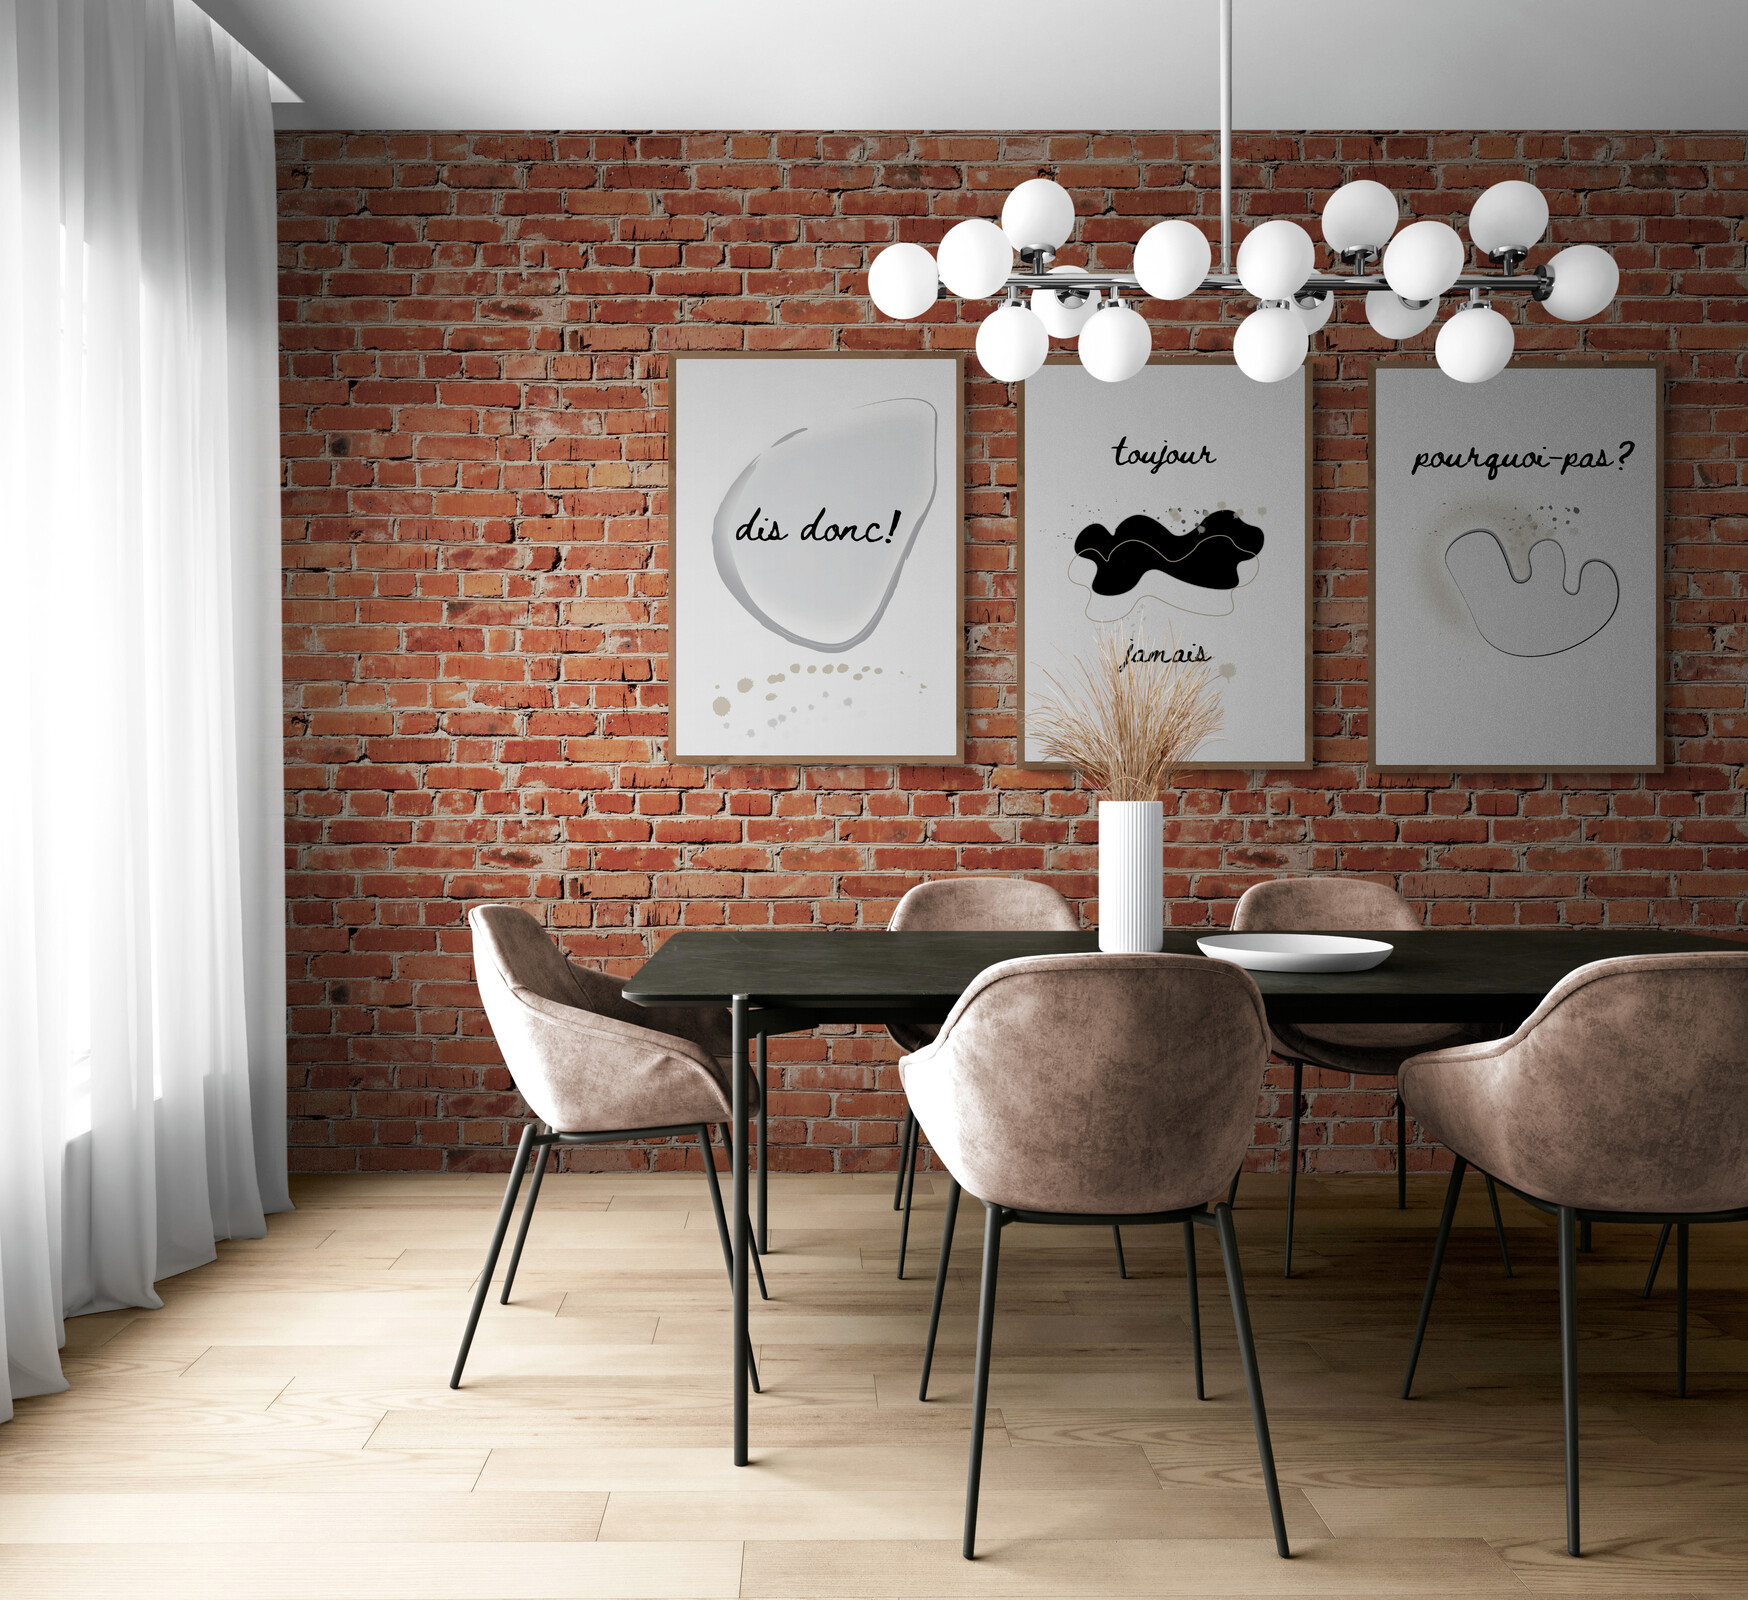 french collection of posters Modern_dining_room_with_pendant_lights